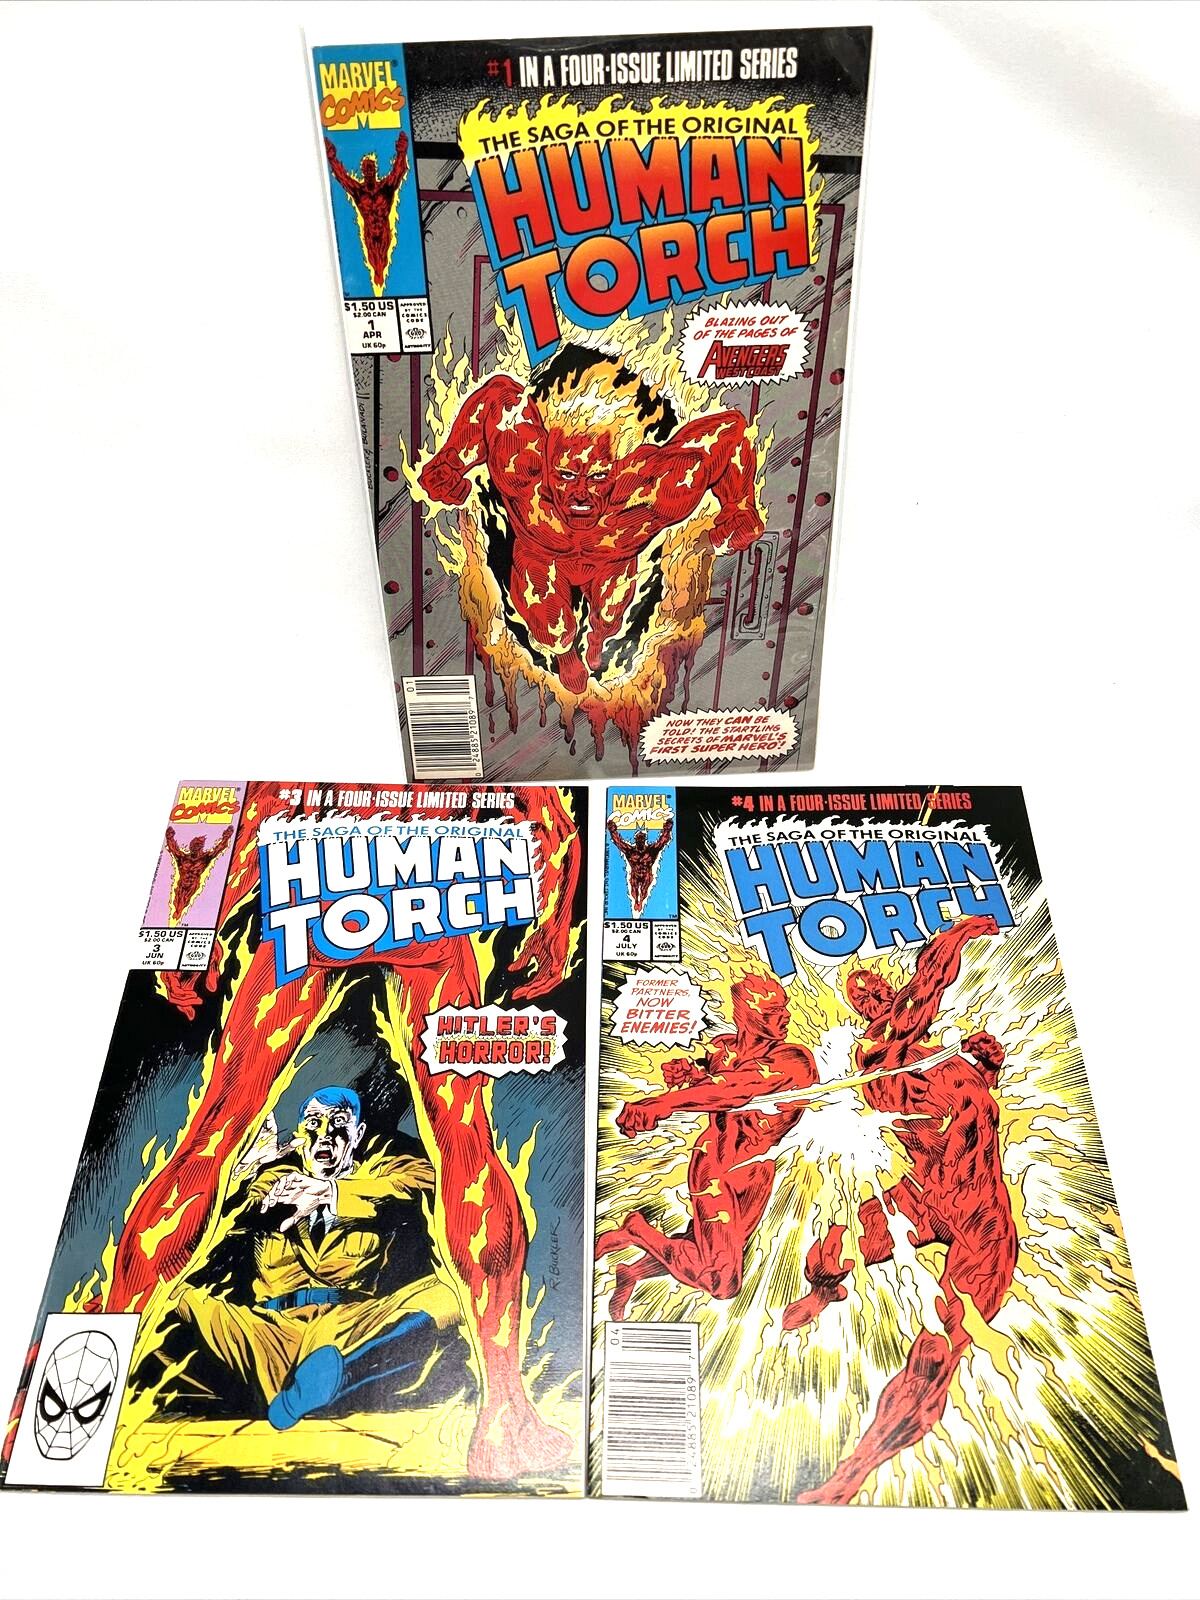 THE HUMAN TORCH #1 3 4 LIMITED SERIES (1990) Set Lot RUN MARVEL